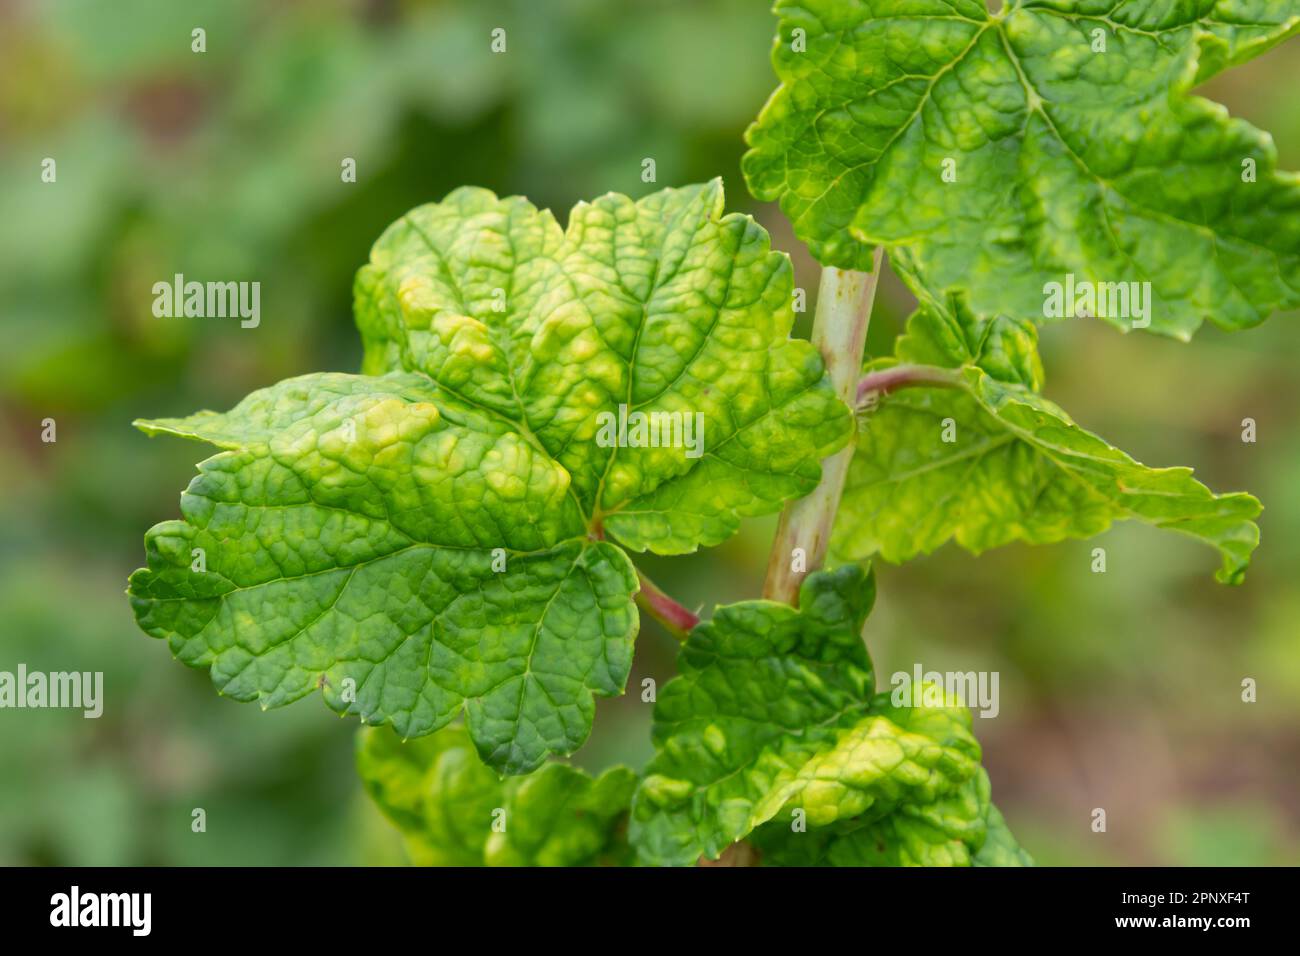 Gallic aphid on the leaves of red currant. The pest damages the currant leaves, red bumps on the leaves of the bush from the parasite disease. Stock Photo